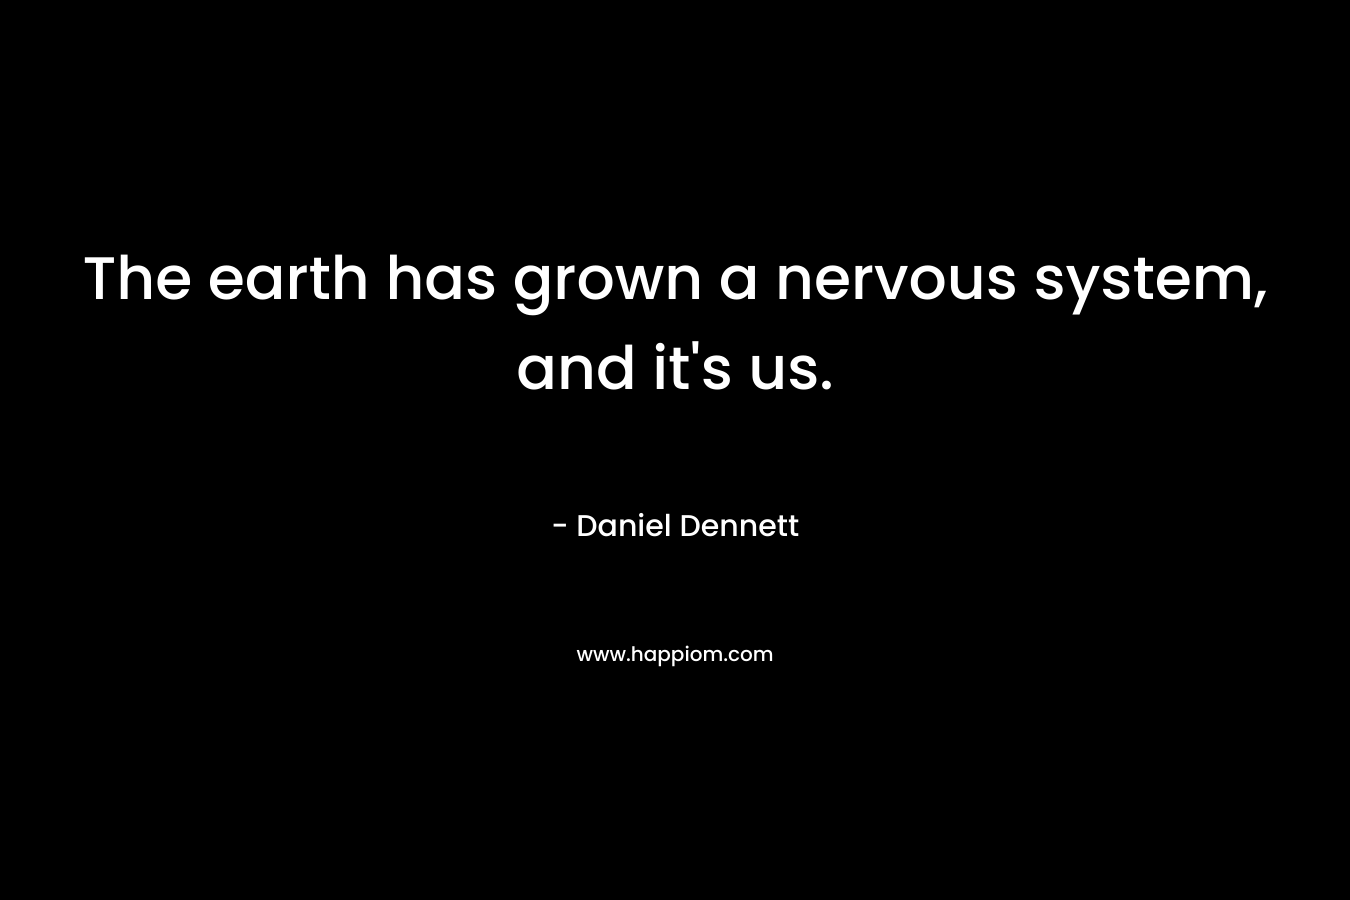 The earth has grown a nervous system, and it's us.